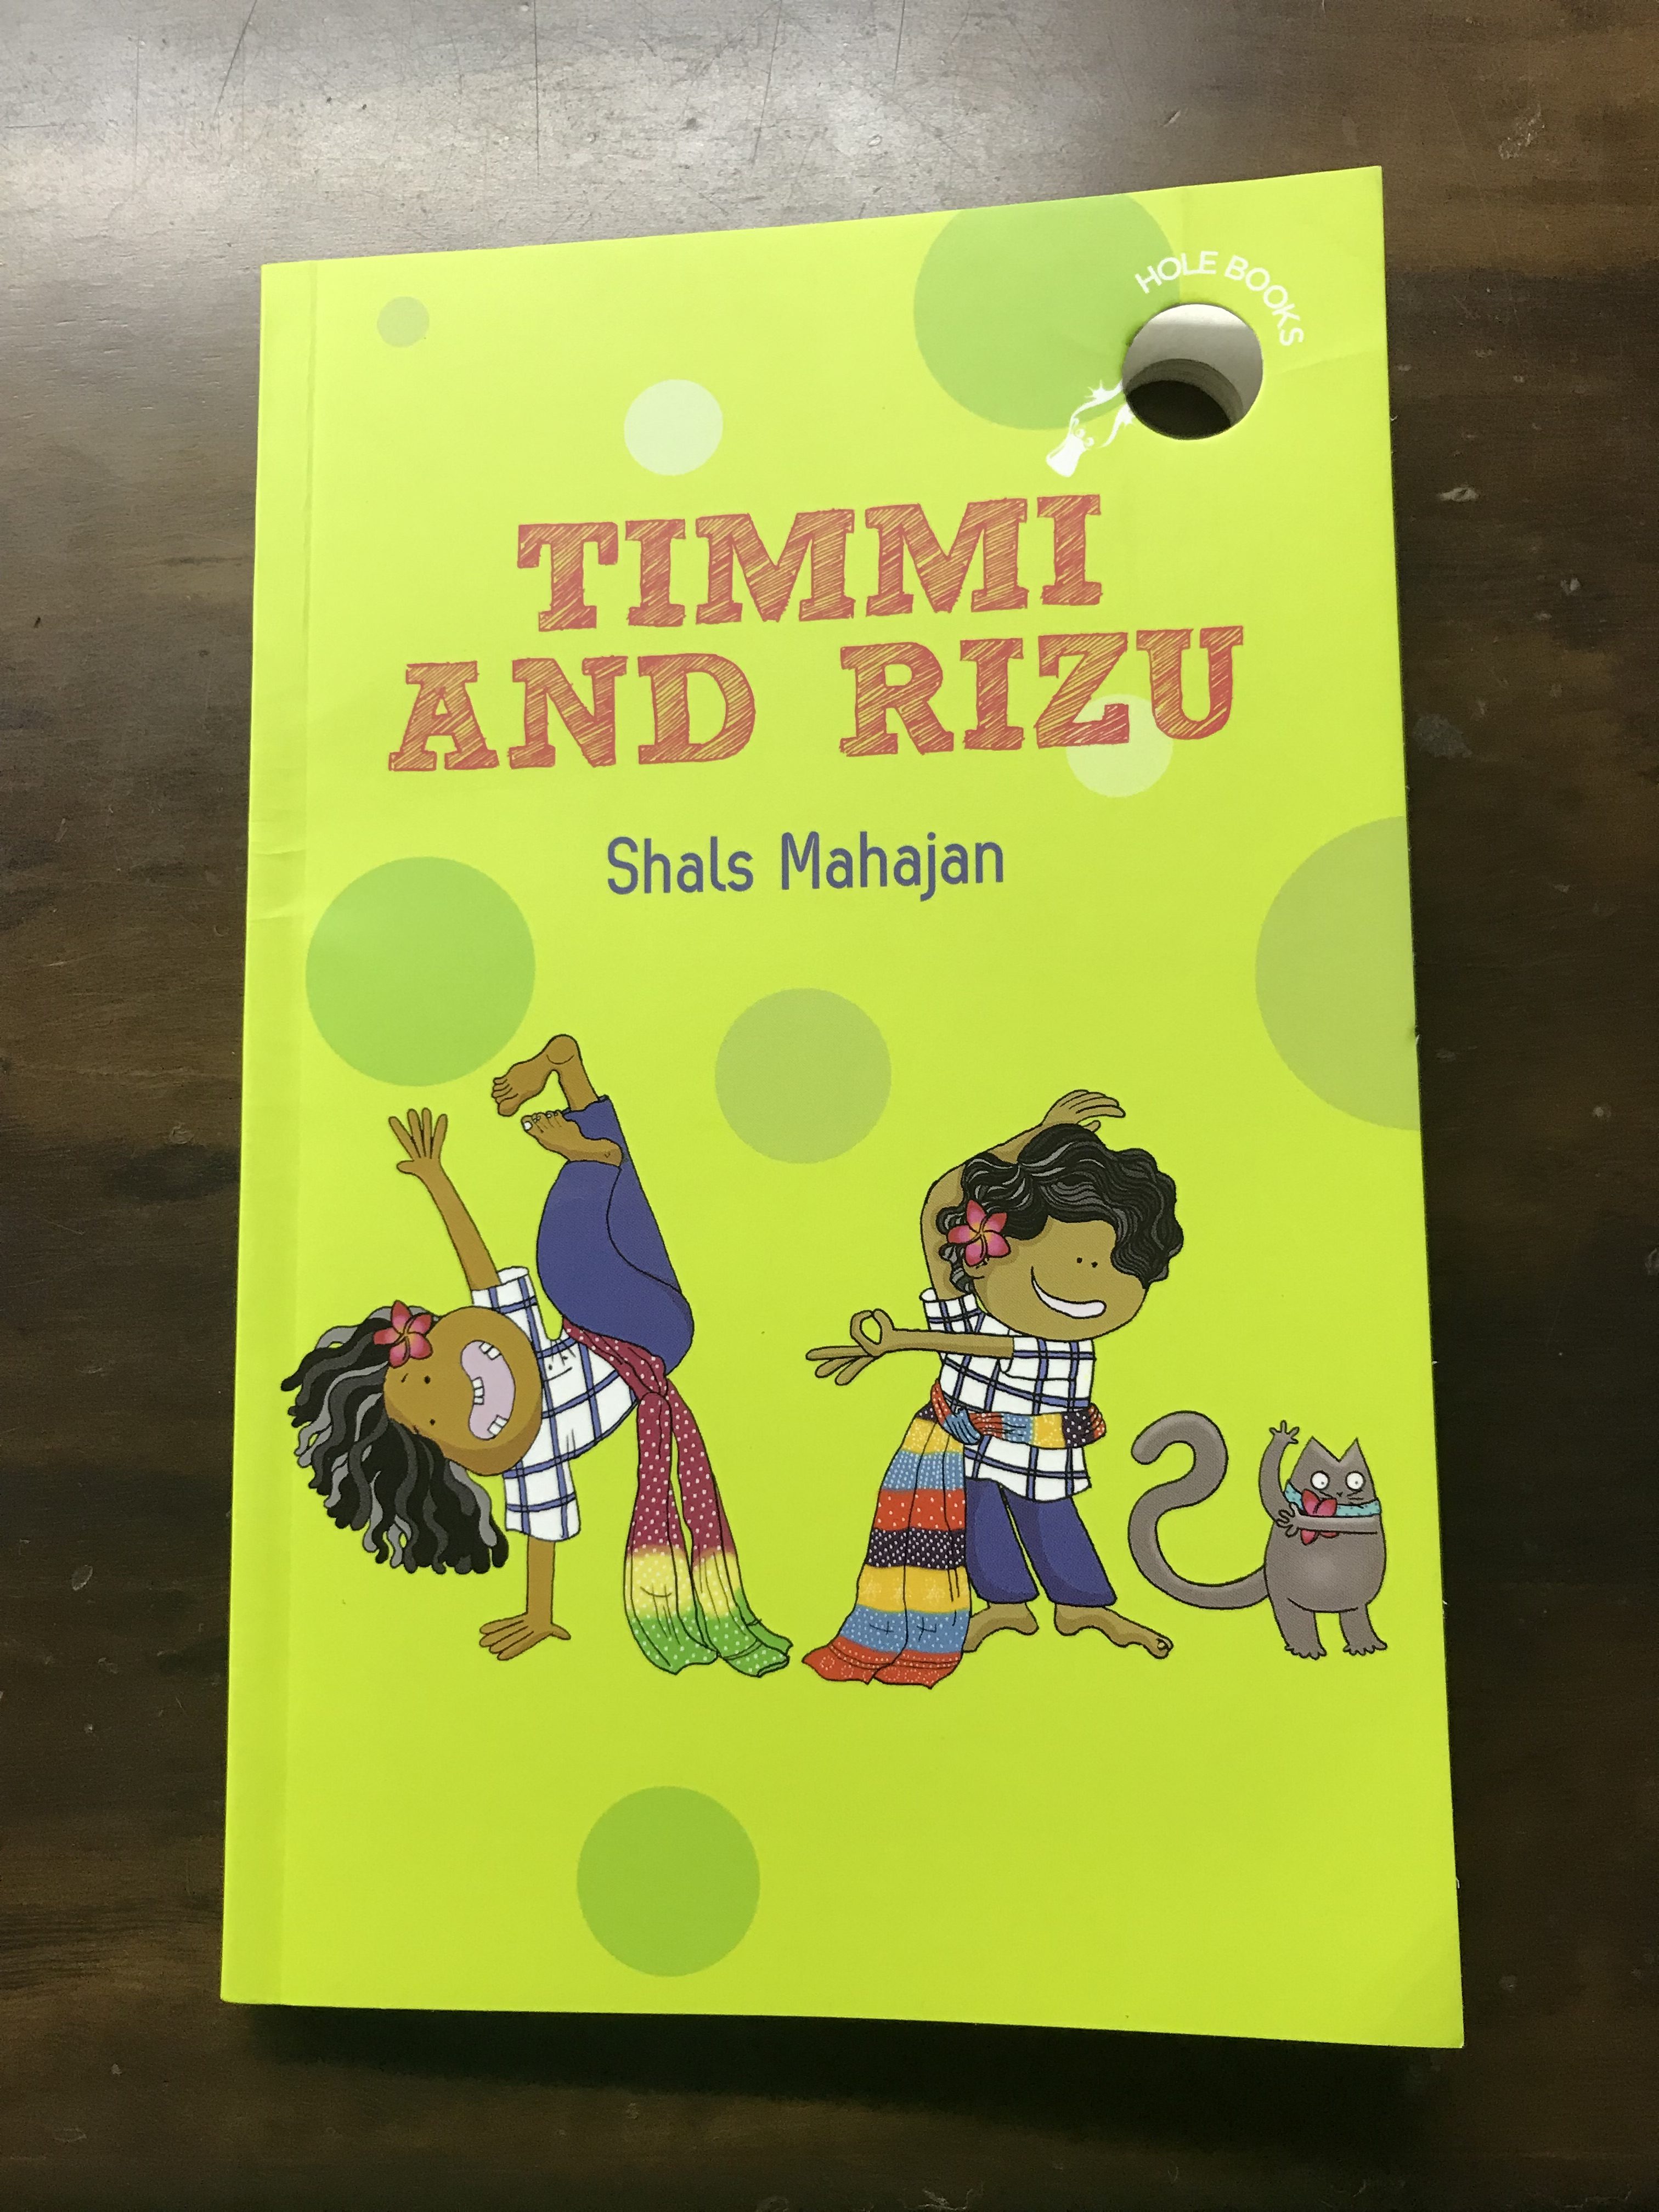 You are currently viewing The book with a ‘hOle’: Timmi and Rizu by Shals Mahajan 